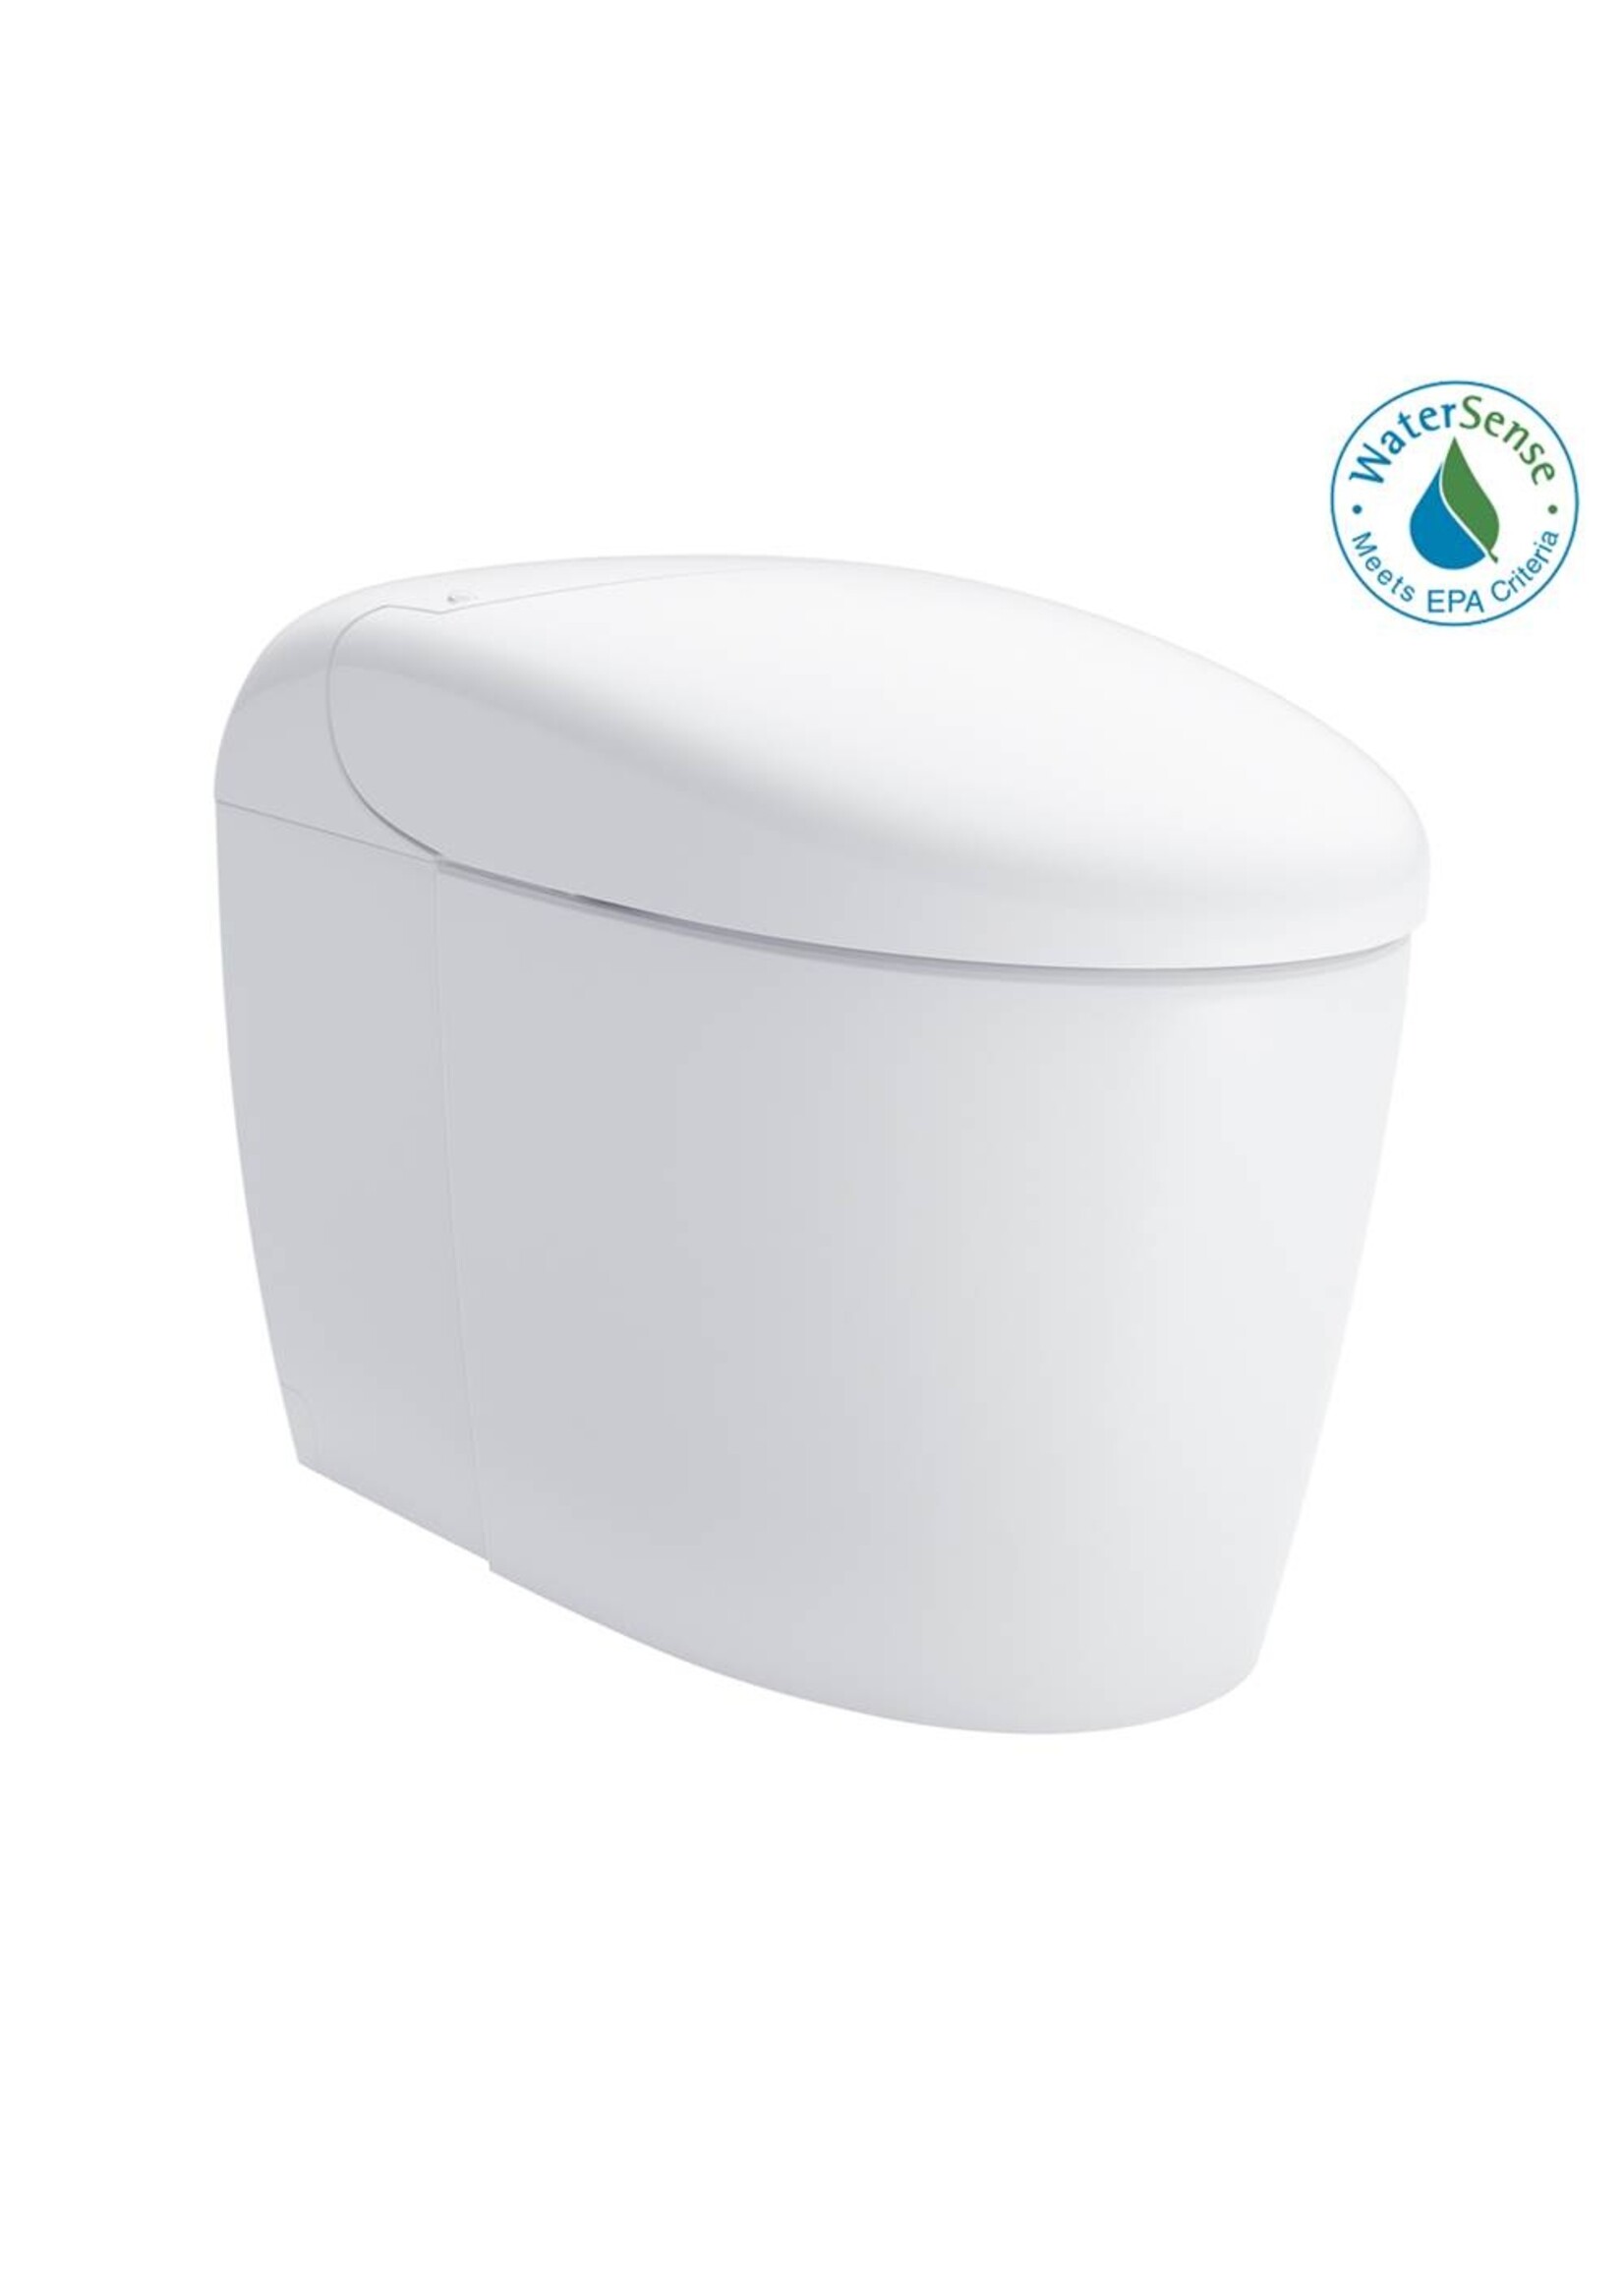 Toto Toto RS 1.0/0.8 Dual Flush System Neorest Toilet